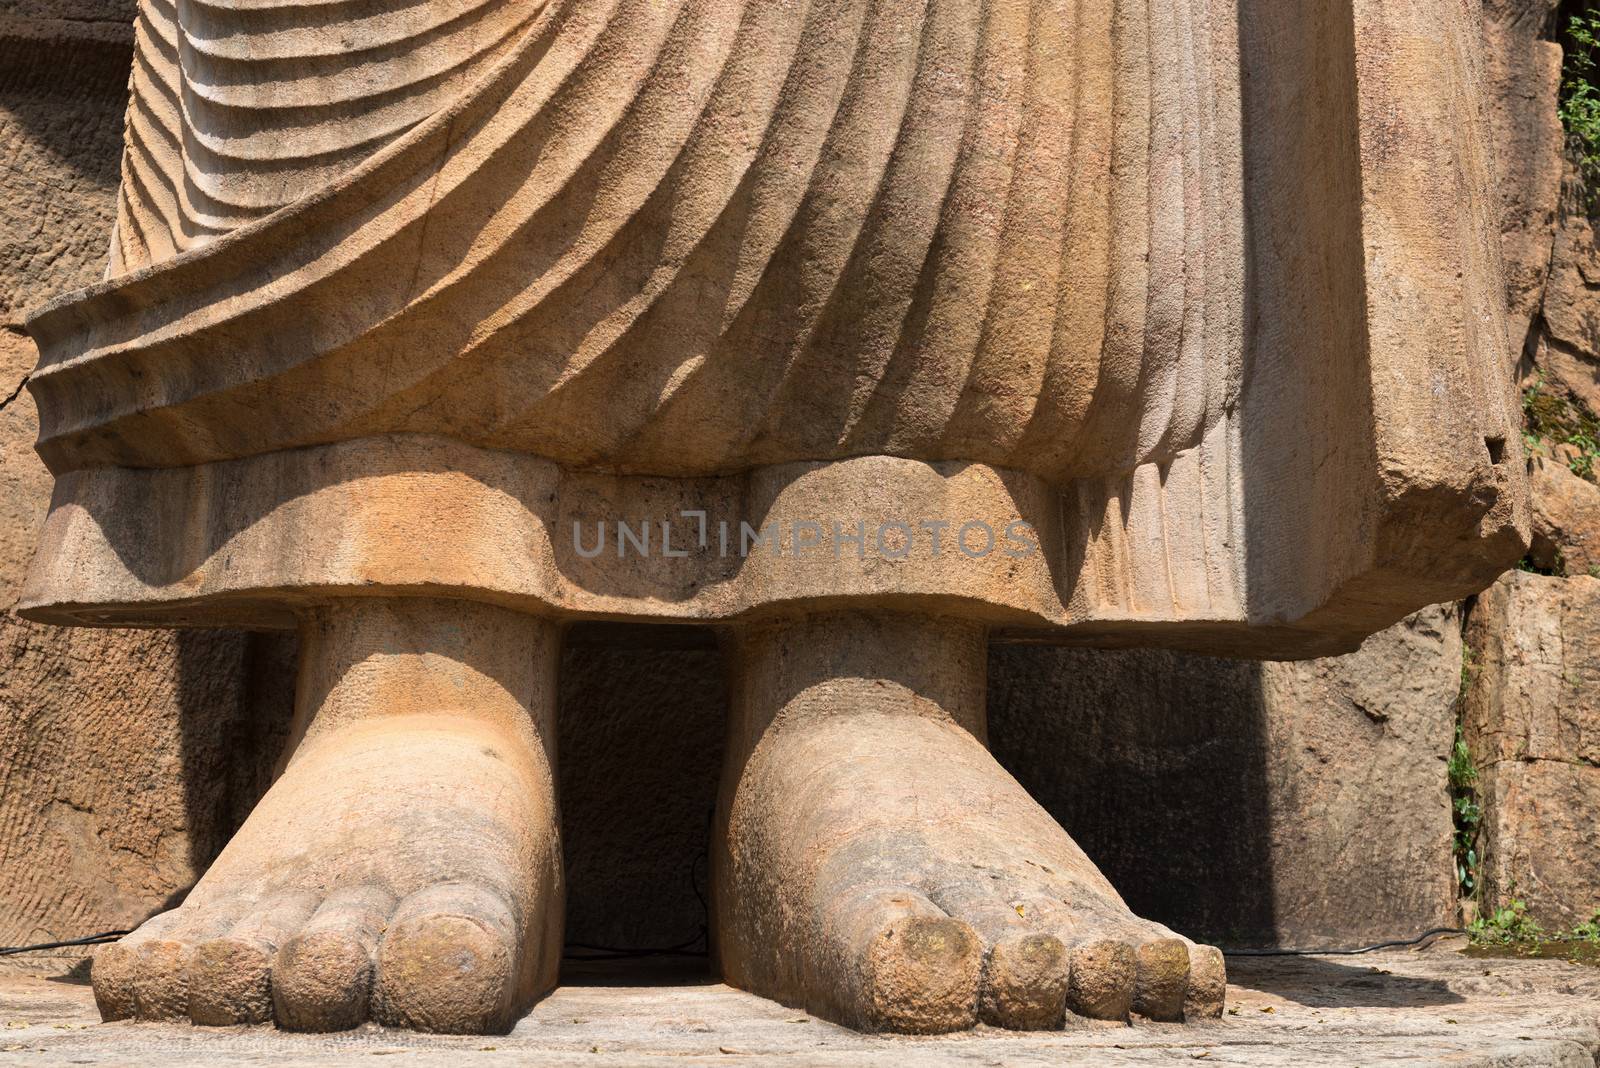 Buddha feet in Avukana standing Buddha statue, Sri Lanka. 40 feet (12 m) high, has been carved out of a large granite rock in the 5th century.